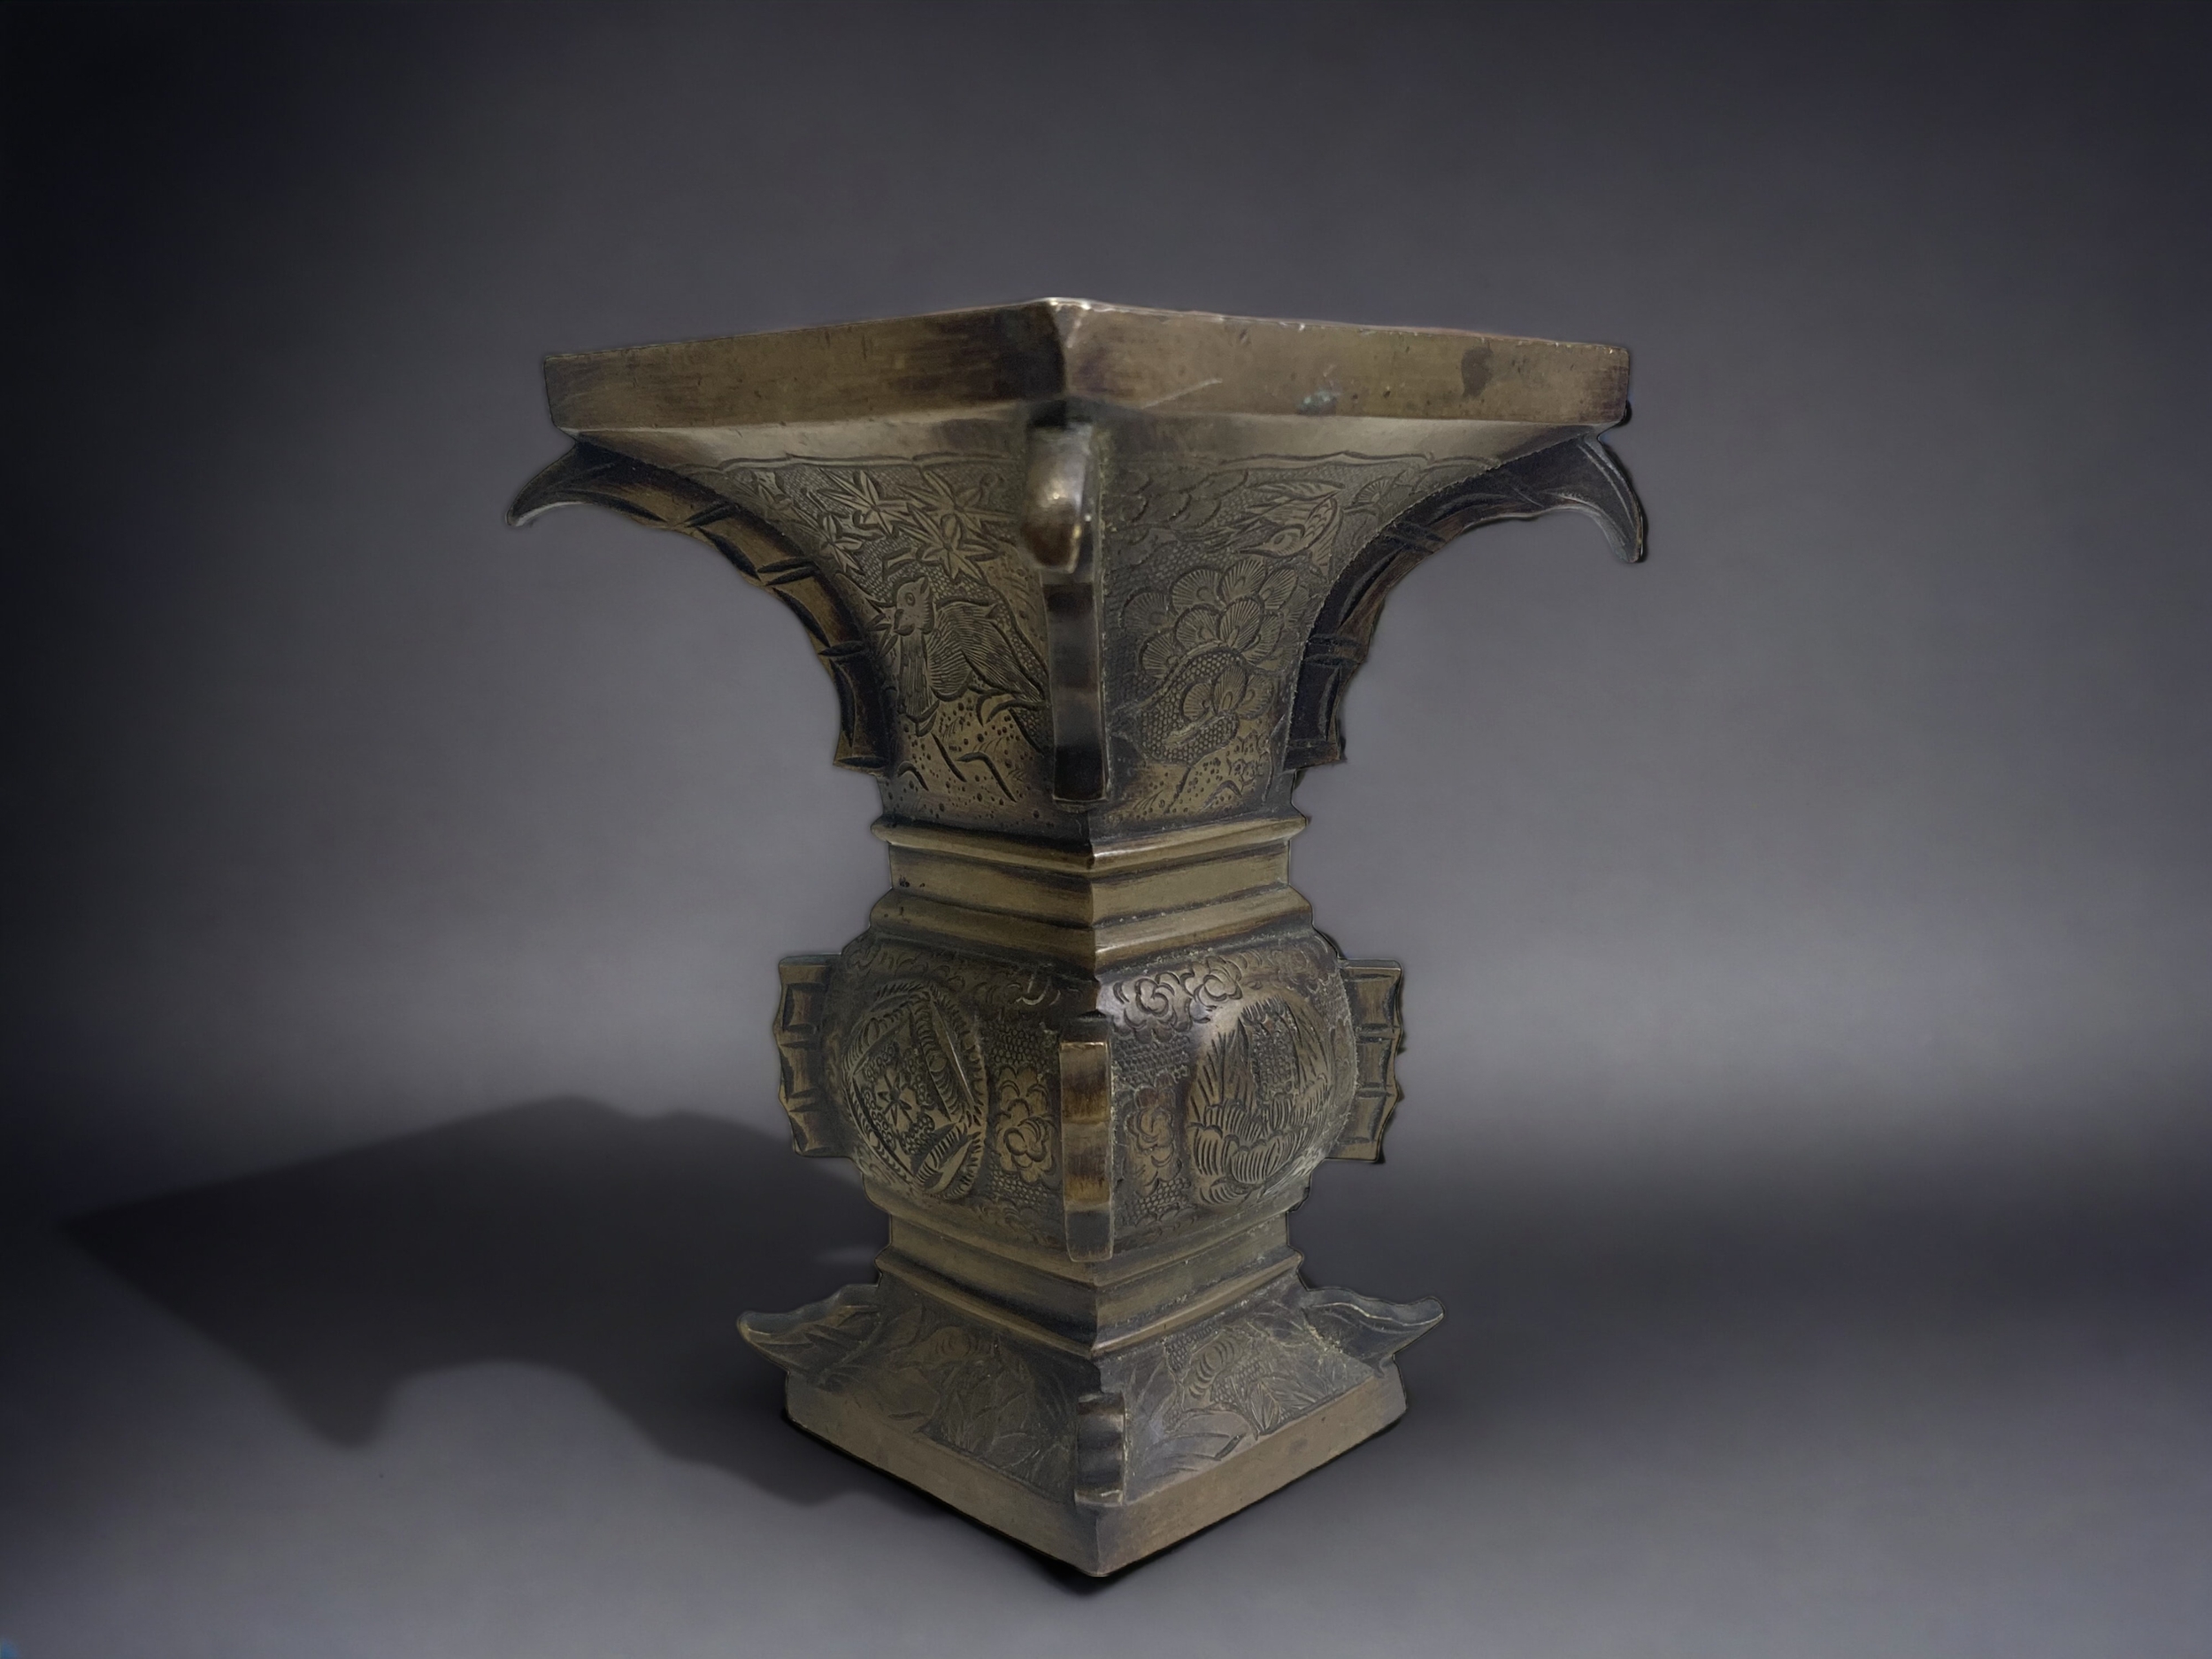 A CHINESE BRONZE CENSER. QING DYNASTY. ARCHAISTIC FORM, ENGRAVED WITH DEET, BIRDS & FLOWERS. - Image 2 of 4